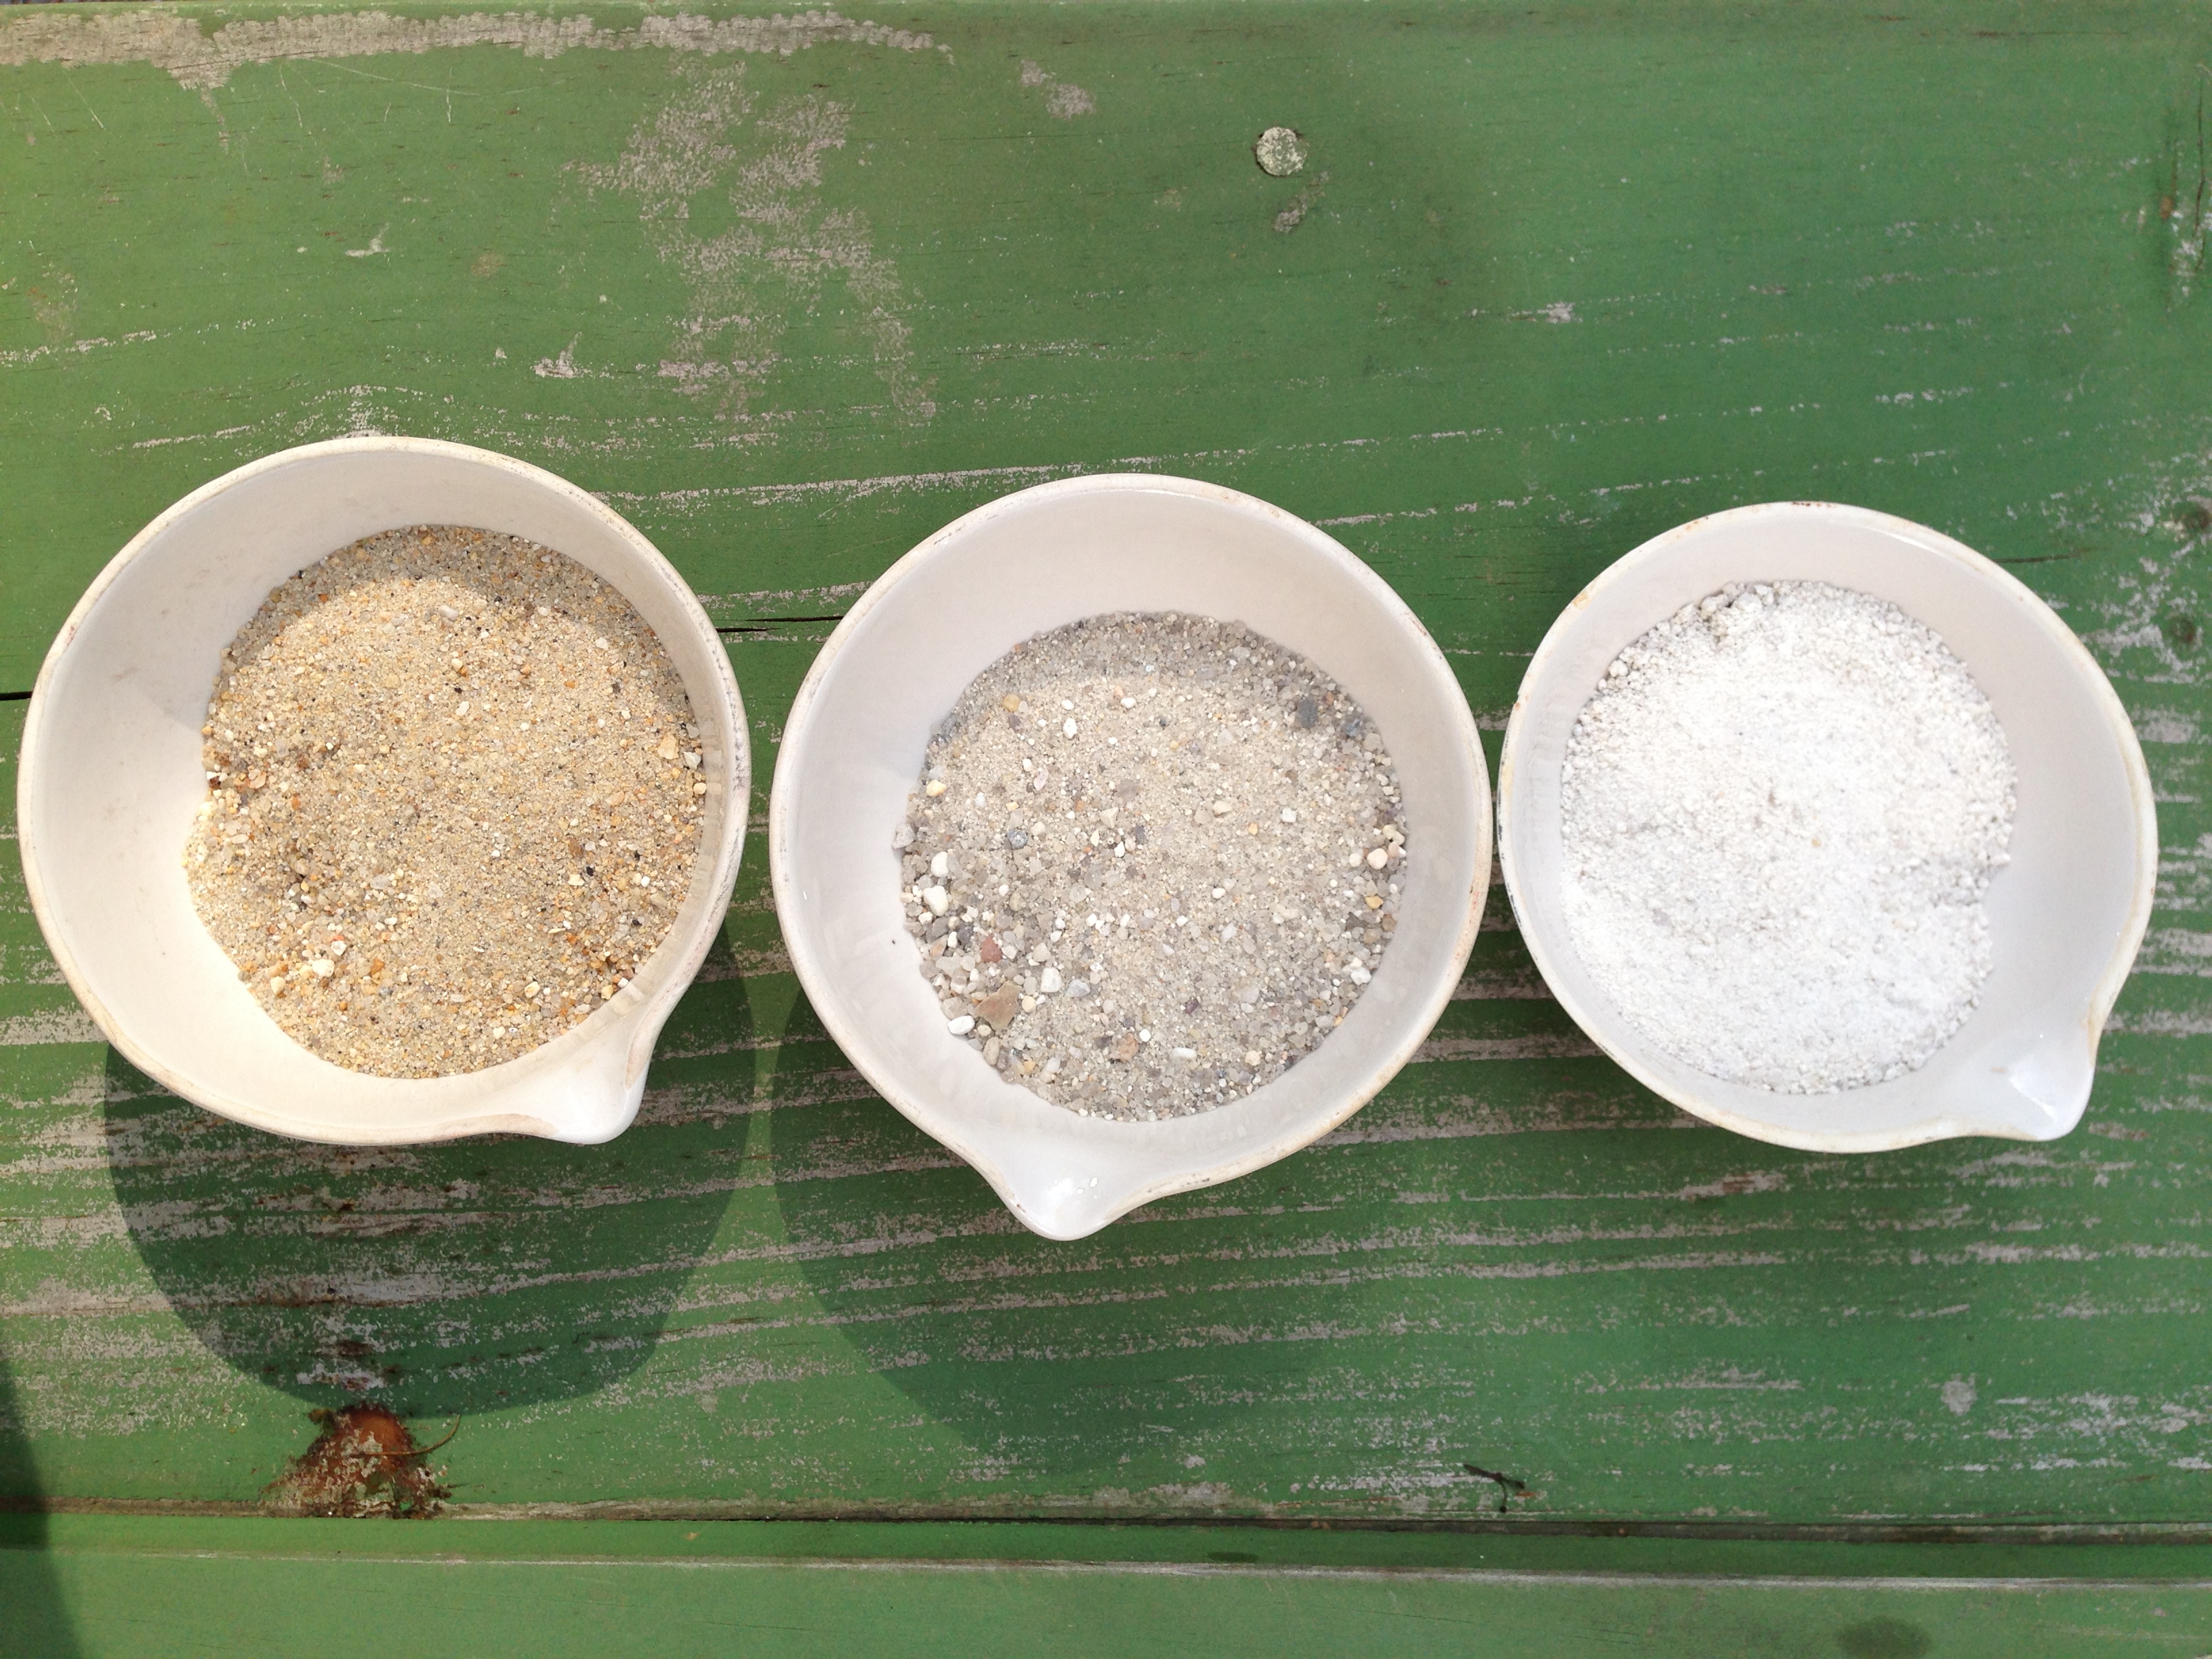 These three aggregates have very different structural capacities for making mortar